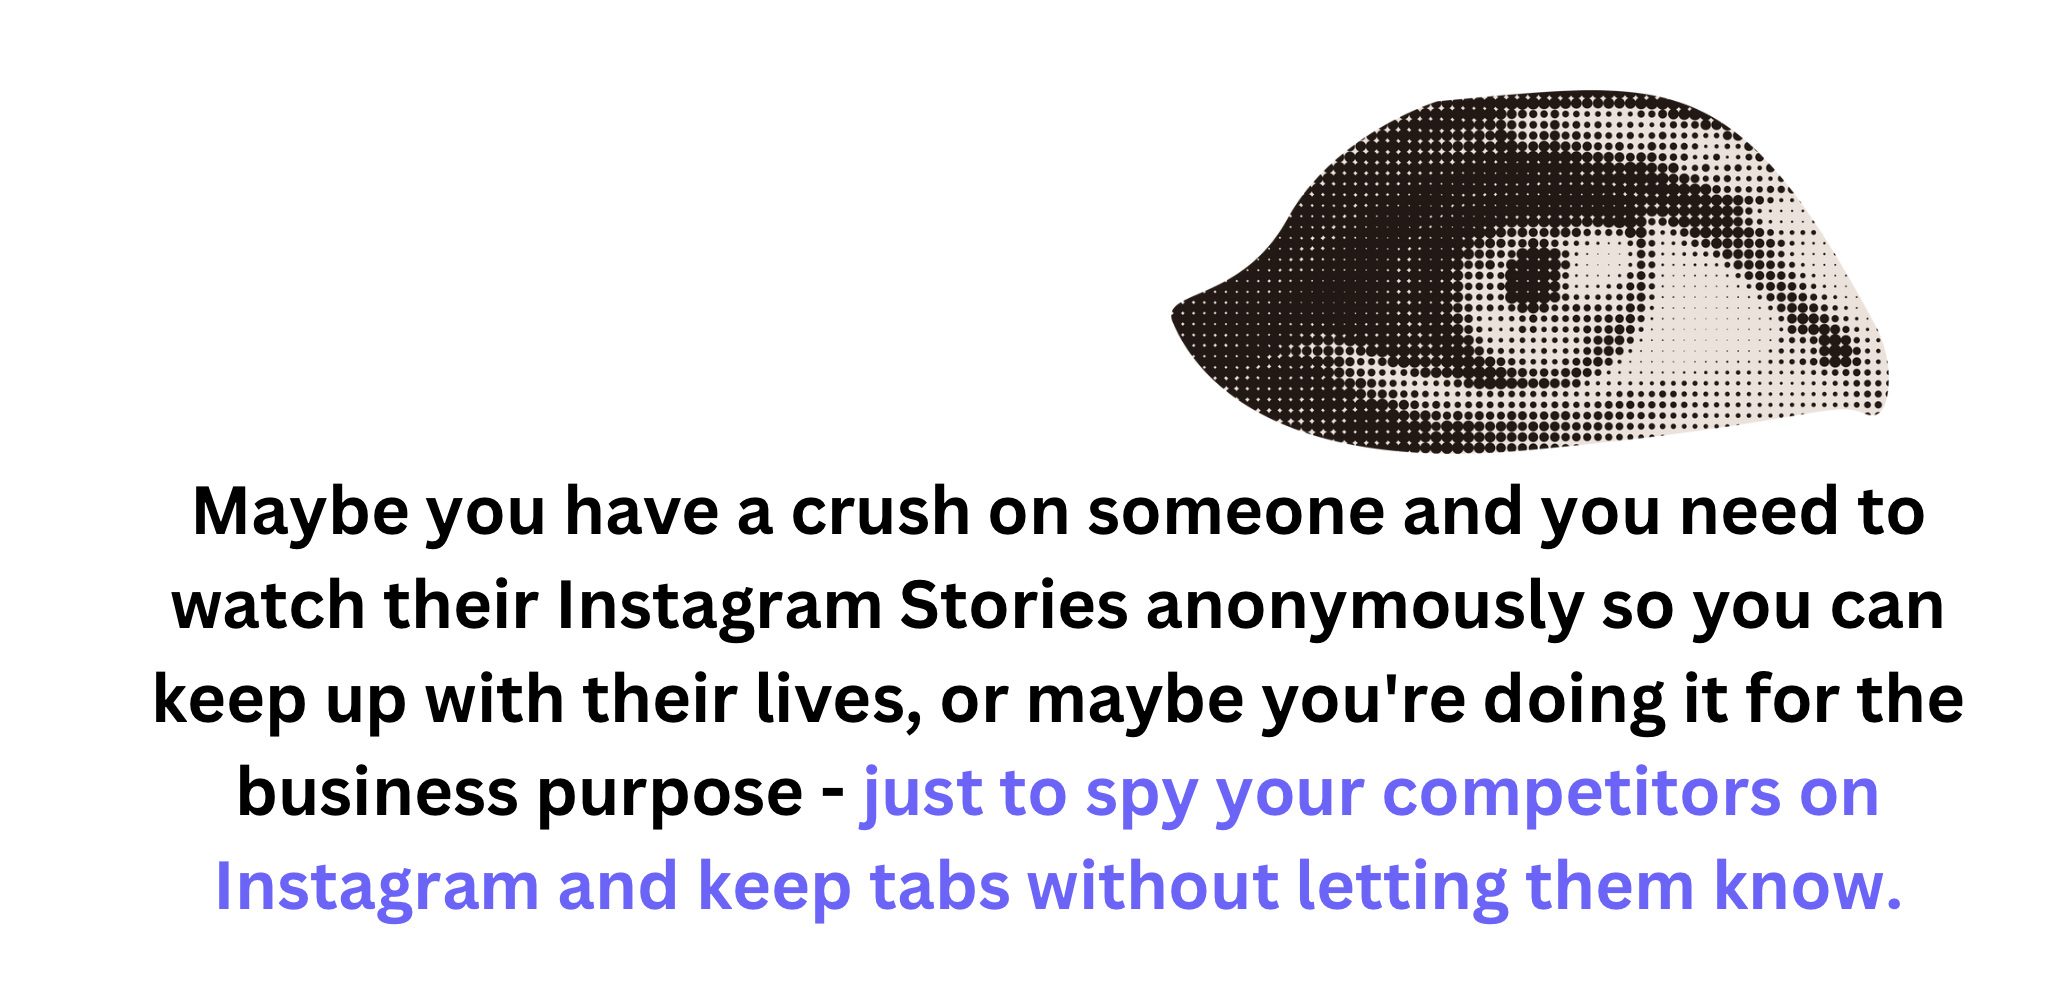 View Instagram Stories Anonymously - 5 Tools with the Viewer Instagram Story Feature